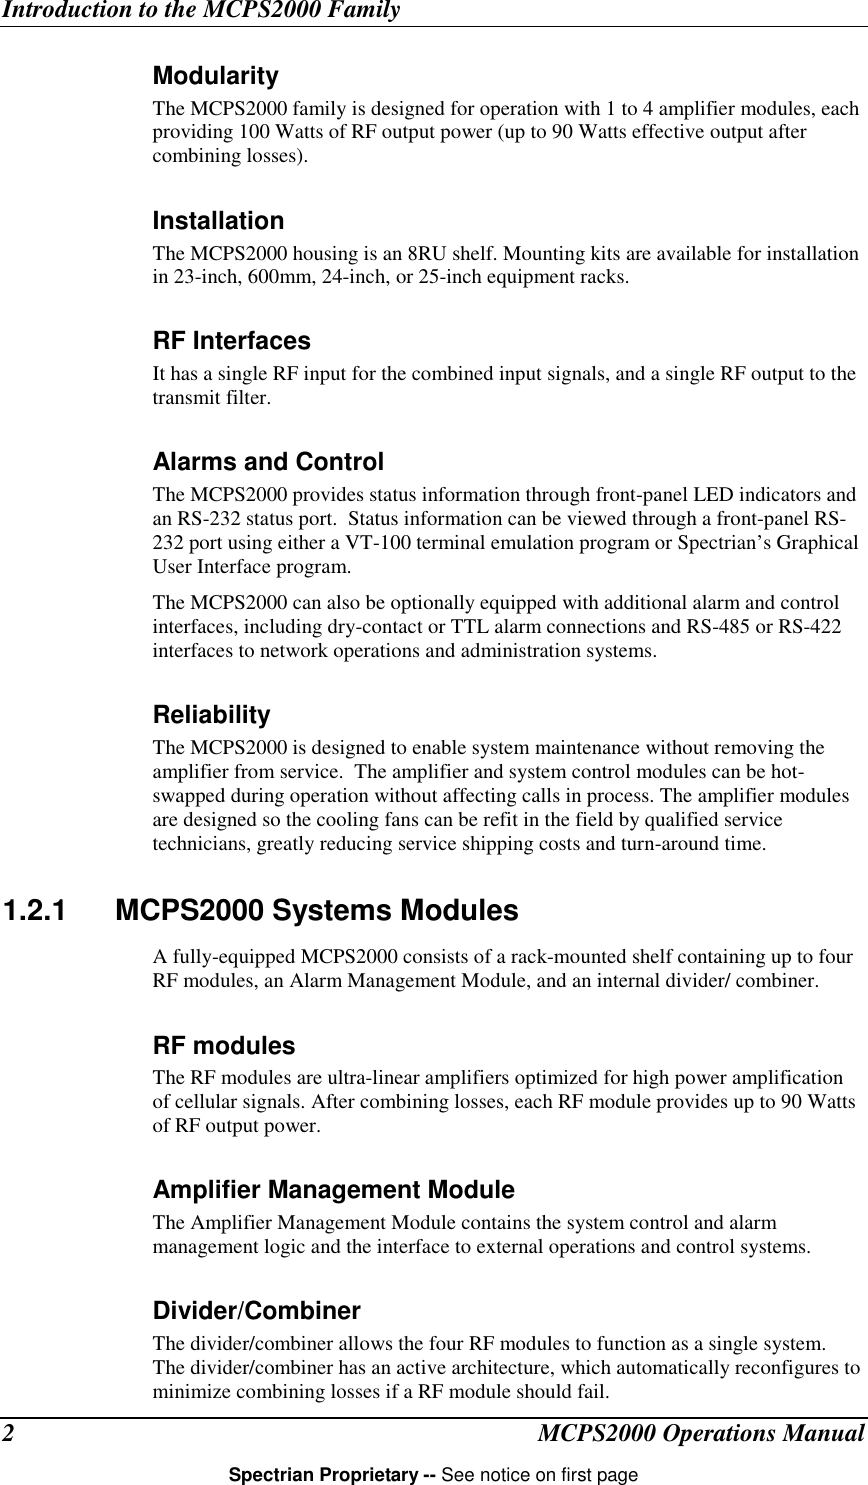 Introduction to the MCPS2000 FamilyMCPS2000 Operations ManualSpectrian Proprietary -- See notice on first page2ModularityThe MCPS2000 family is designed for operation with 1 to 4 amplifier modules, eachproviding 100 Watts of RF output power (up to 90 Watts effective output aftercombining losses).InstallationThe MCPS2000 housing is an 8RU shelf. Mounting kits are available for installationin 23-inch, 600mm, 24-inch, or 25-inch equipment racks.RF InterfacesIt has a single RF input for the combined input signals, and a single RF output to thetransmit filter.Alarms and ControlThe MCPS2000 provides status information through front-panel LED indicators andan RS-232 status port.  Status information can be viewed through a front-panel RS-232 port using either a VT-100 terminal emulation program or Spectrian’s GraphicalUser Interface program.The MCPS2000 can also be optionally equipped with additional alarm and controlinterfaces, including dry-contact or TTL alarm connections and RS-485 or RS-422interfaces to network operations and administration systems.ReliabilityThe MCPS2000 is designed to enable system maintenance without removing theamplifier from service.  The amplifier and system control modules can be hot-swapped during operation without affecting calls in process. The amplifier modulesare designed so the cooling fans can be refit in the field by qualified servicetechnicians, greatly reducing service shipping costs and turn-around time.1.2.1 MCPS2000 Systems ModulesA fully-equipped MCPS2000 consists of a rack-mounted shelf containing up to fourRF modules, an Alarm Management Module, and an internal divider/ combiner.RF modulesThe RF modules are ultra-linear amplifiers optimized for high power amplificationof cellular signals. After combining losses, each RF module provides up to 90 Wattsof RF output power.Amplifier Management ModuleThe Amplifier Management Module contains the system control and alarmmanagement logic and the interface to external operations and control systems.Divider/CombinerThe divider/combiner allows the four RF modules to function as a single system.The divider/combiner has an active architecture, which automatically reconfigures tominimize combining losses if a RF module should fail.